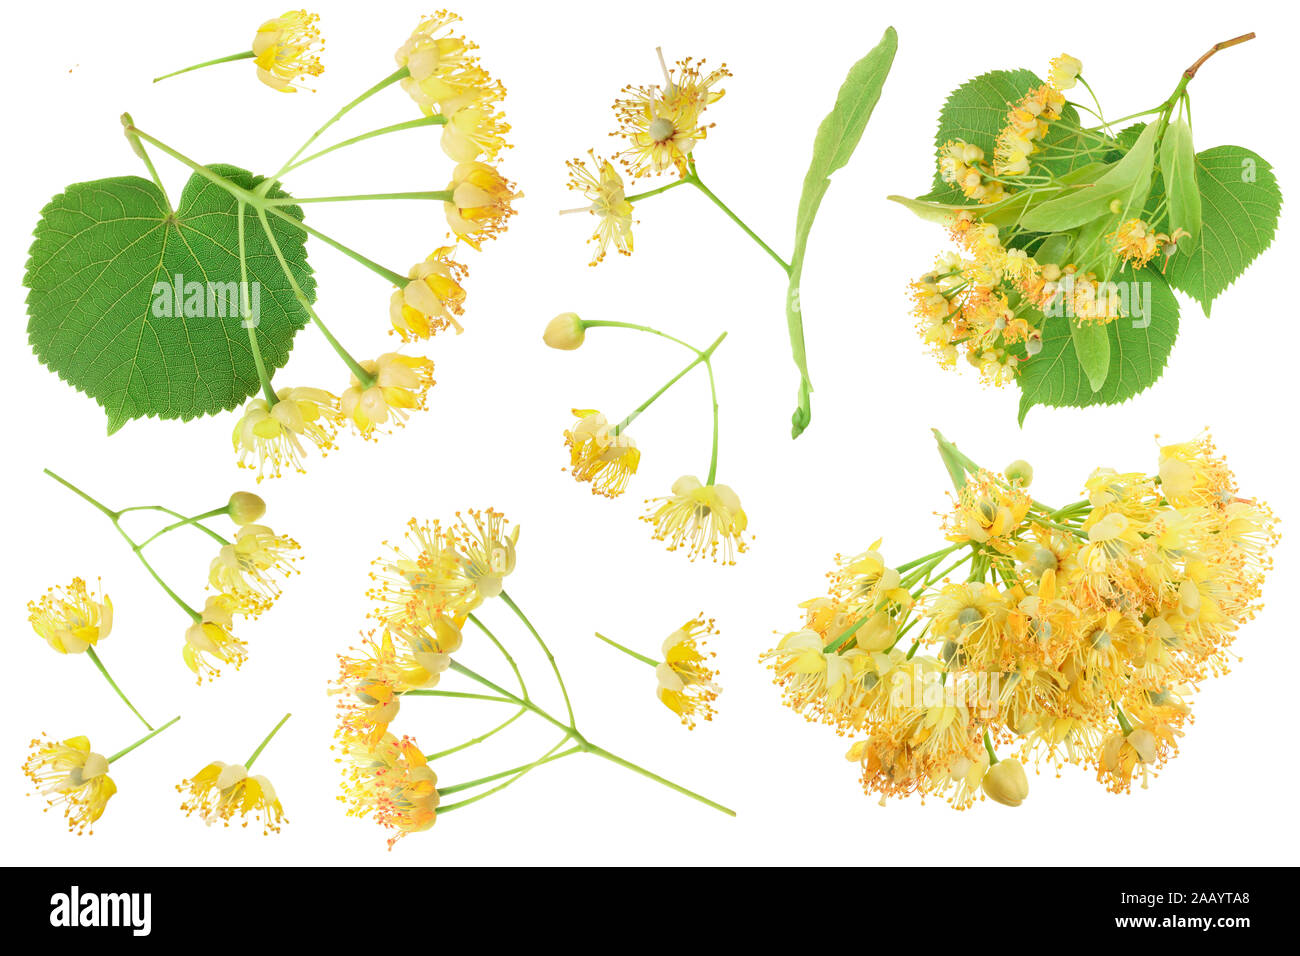 Linden flowers with leaf isolated on white background. Top view. Flat lay. Stock Photo